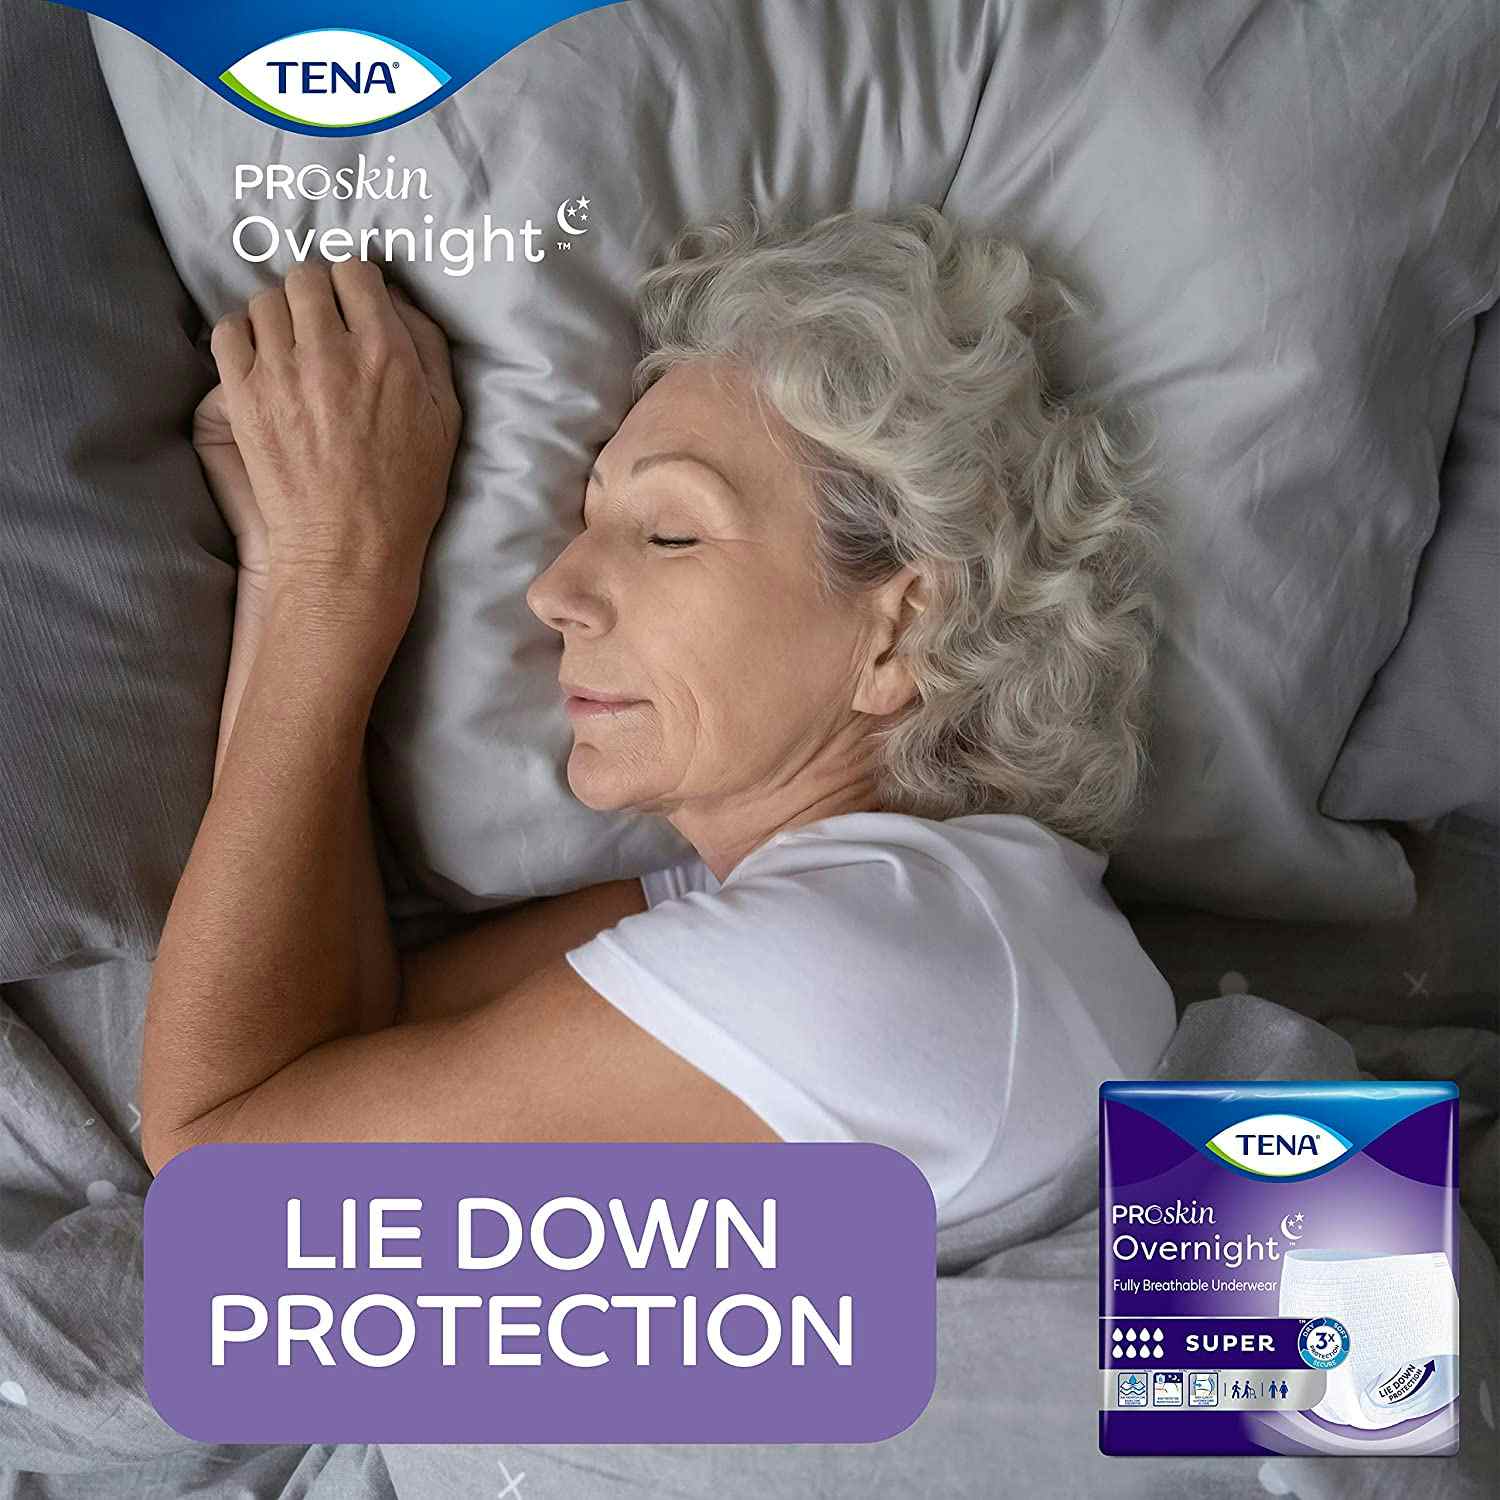 TENA Overnight Super Protective Incontinence Underwear, Overnight Absorbency, lifestyle